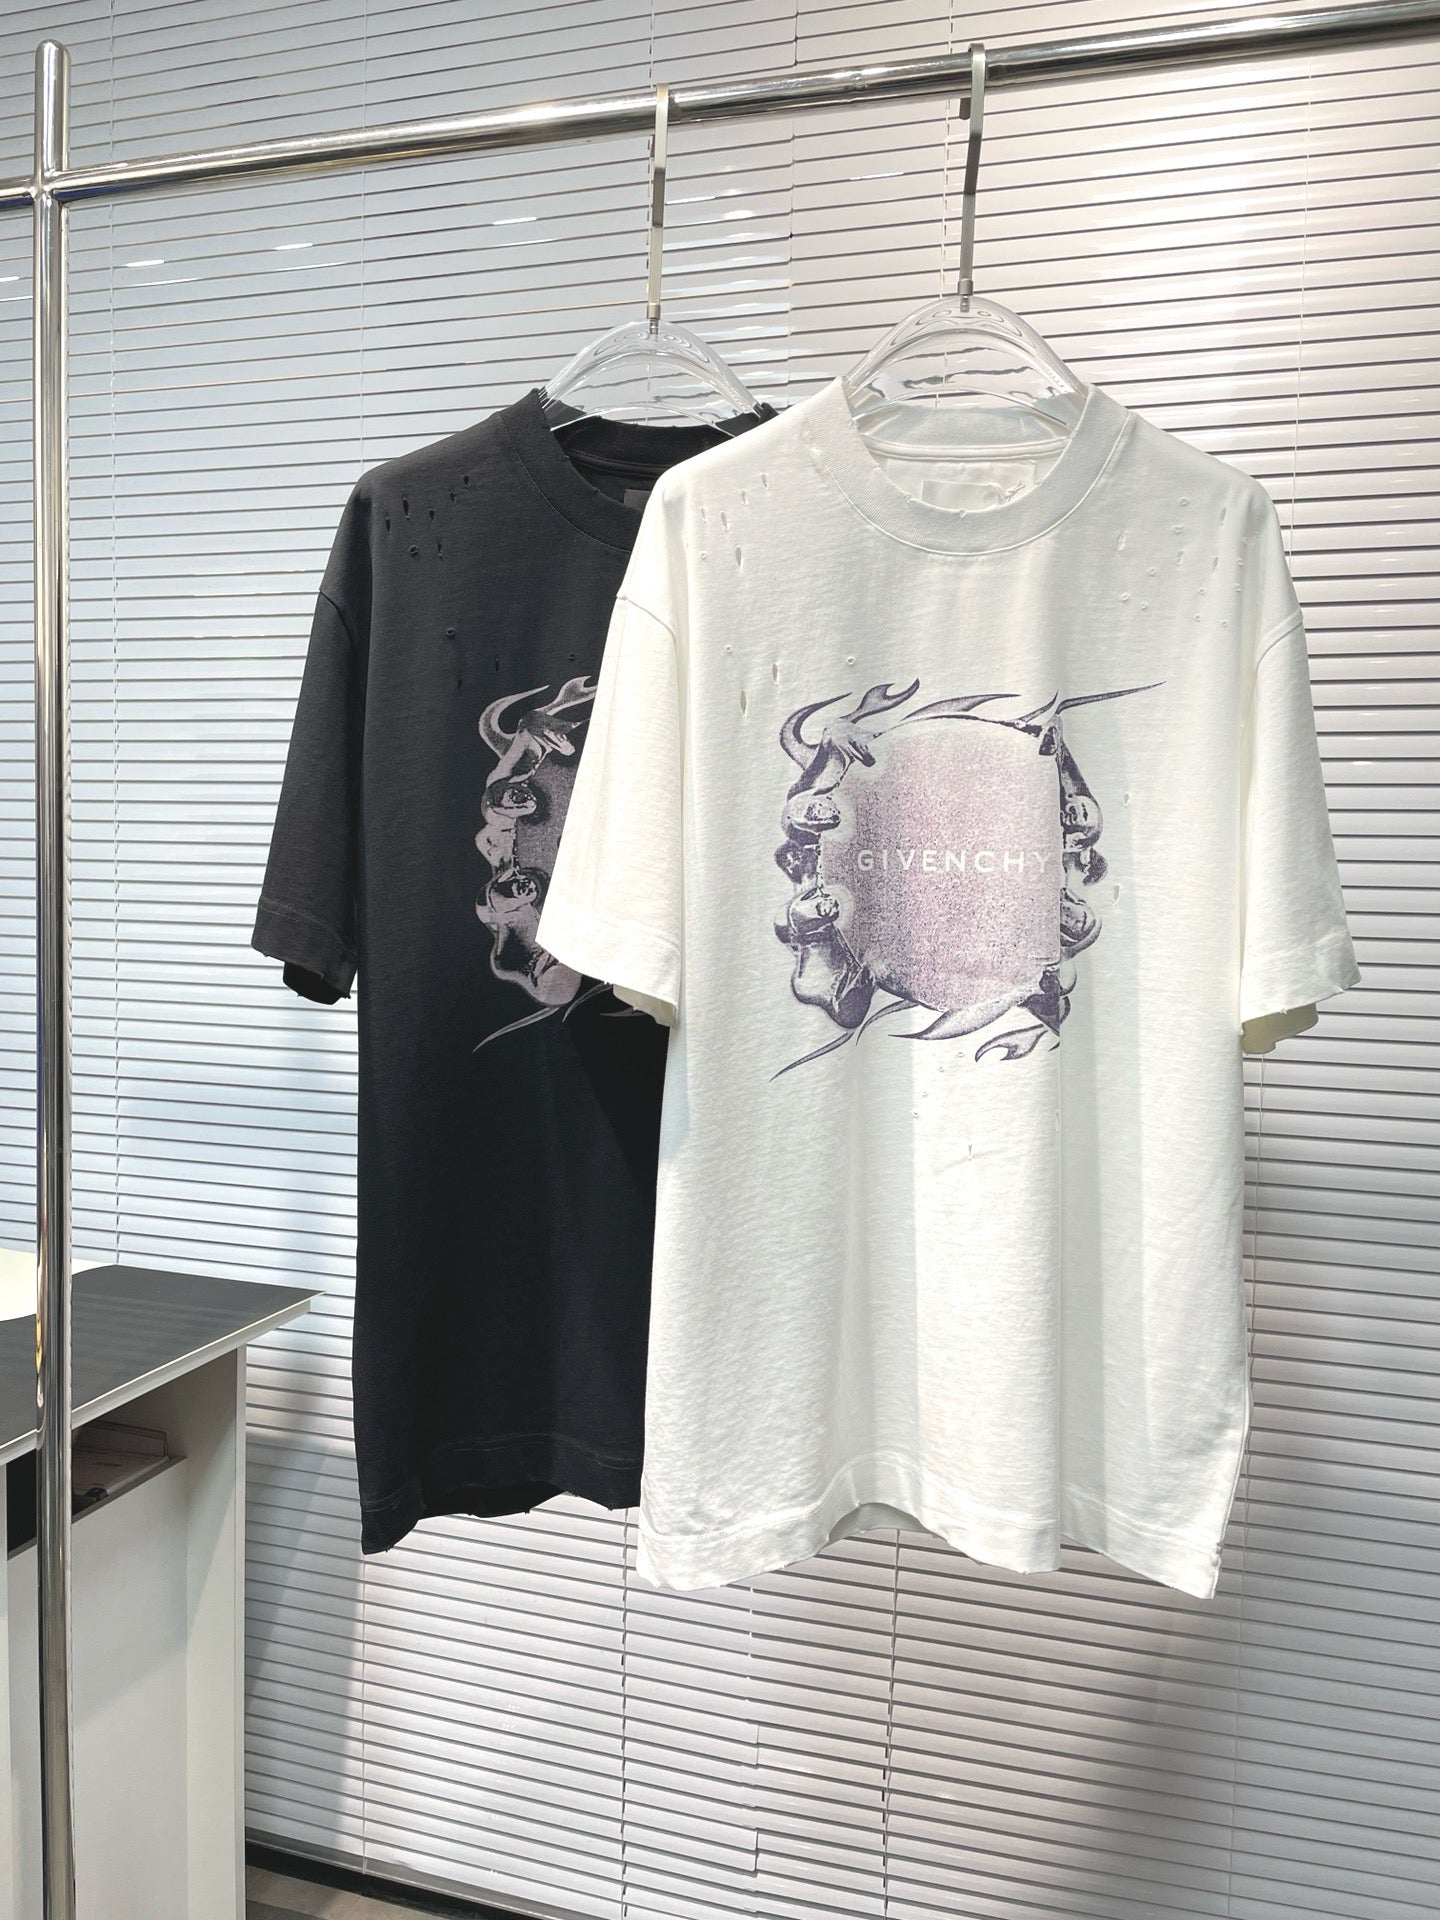 Black and White T-shirts